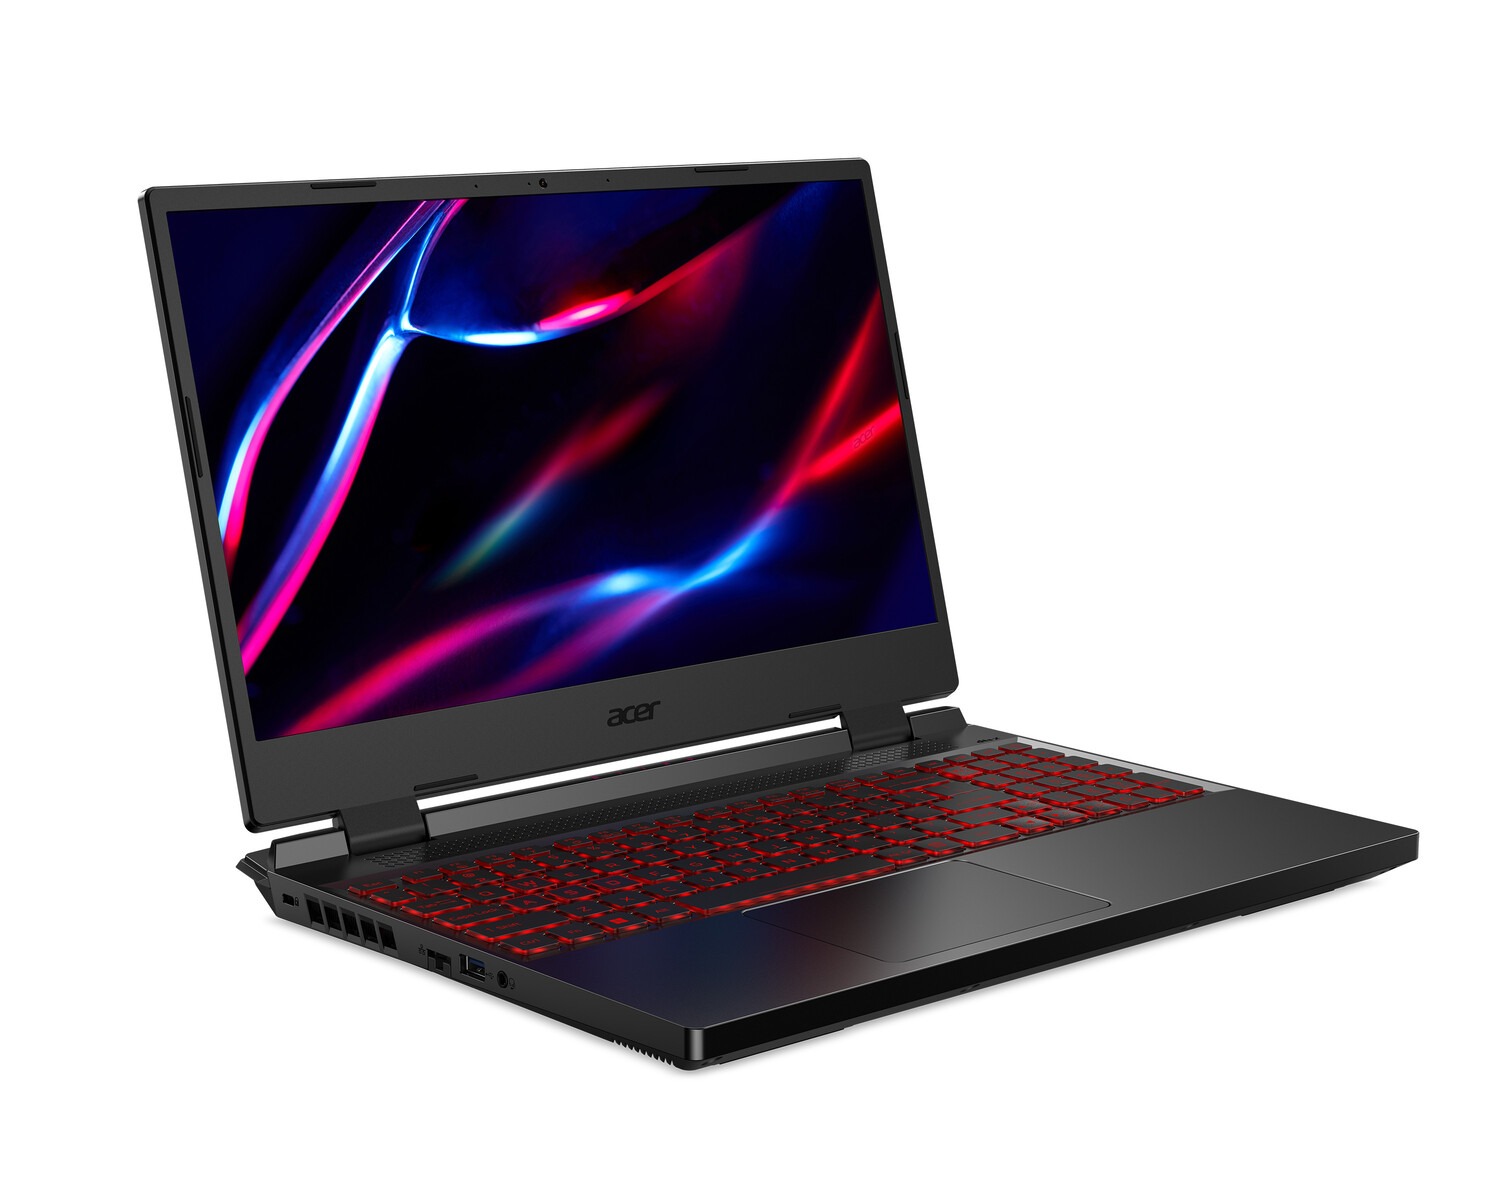 Today, we reviewed Acer Nitro 5 2022, a great budget gaming laptop that can provide most users with what they need in terms of productivity and gaming.